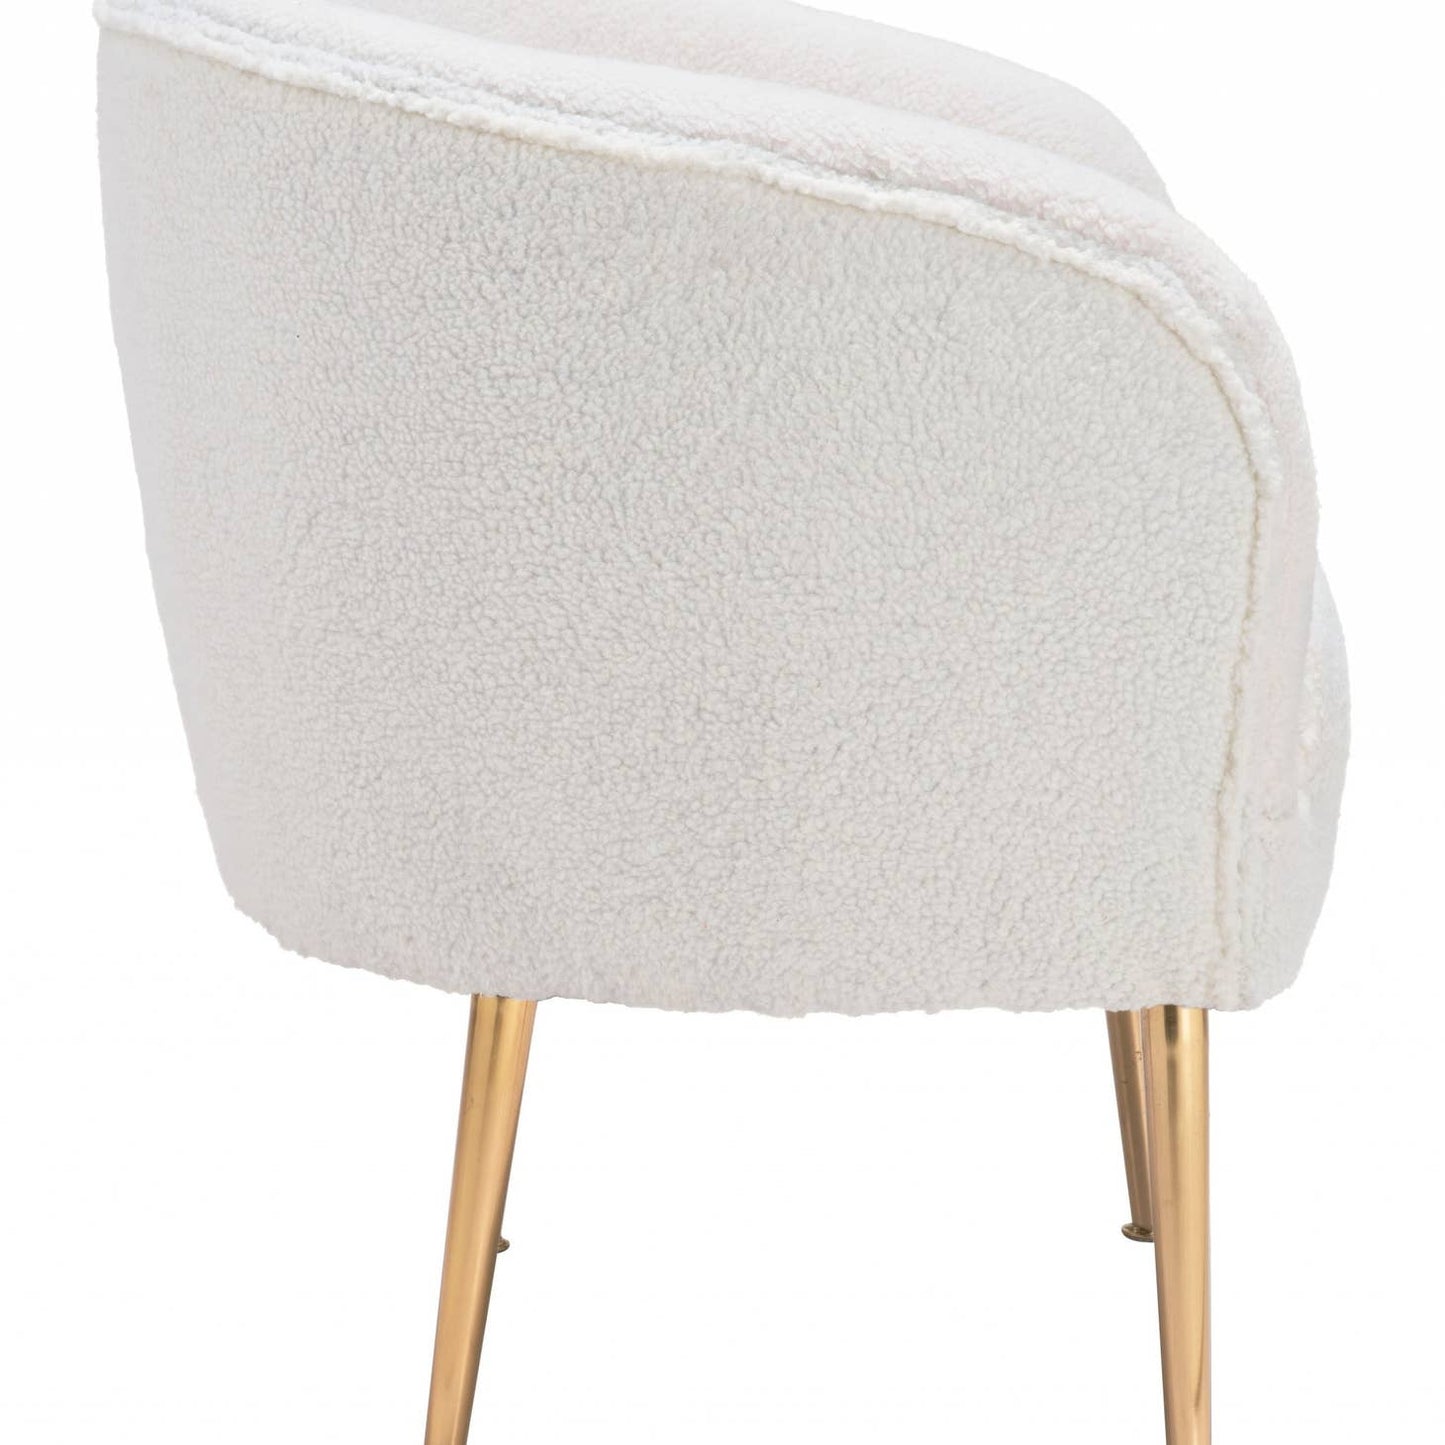 29" Beige Sherpa and Gold Arm Chair